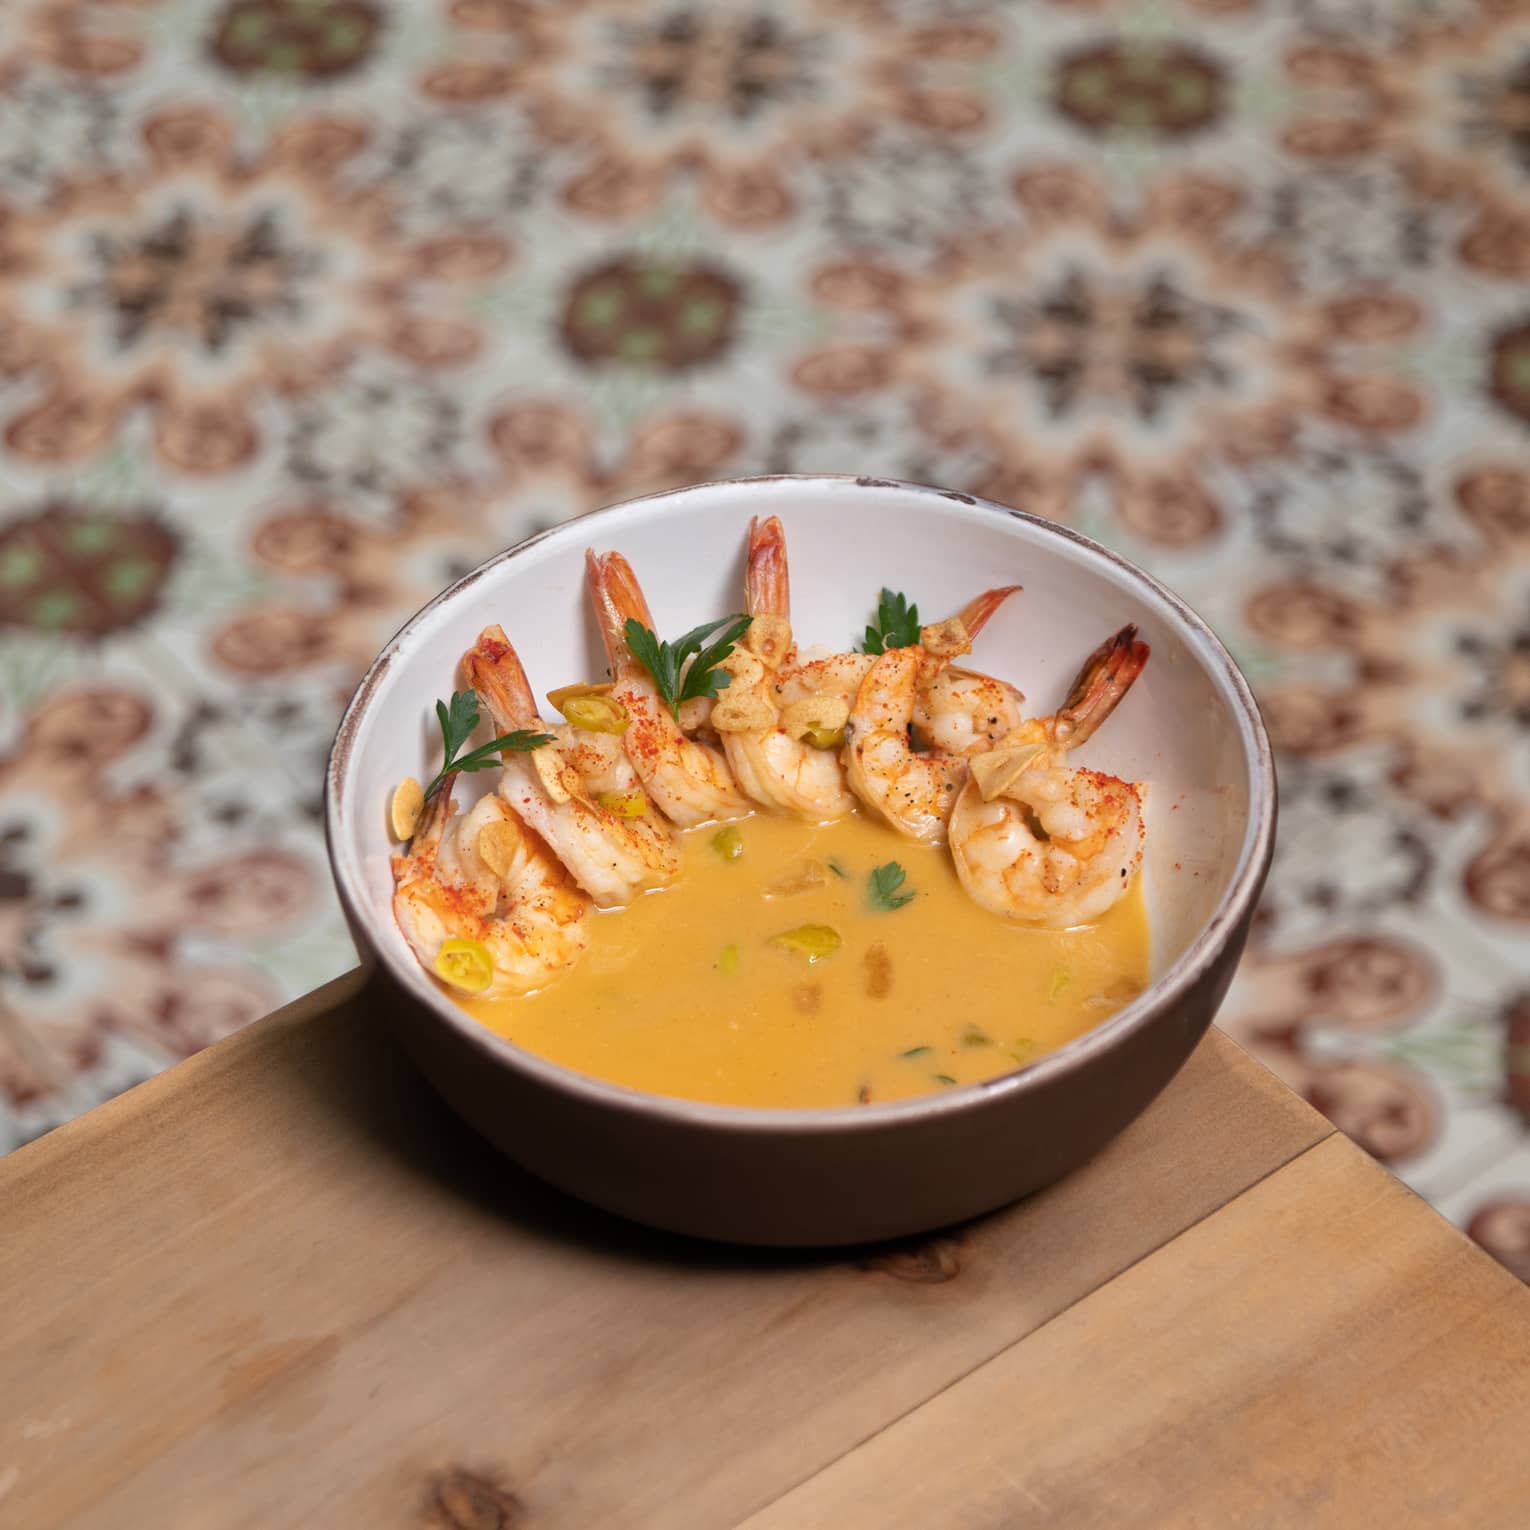 Shrimp in a yellow sauce served in a ceramic bowl.